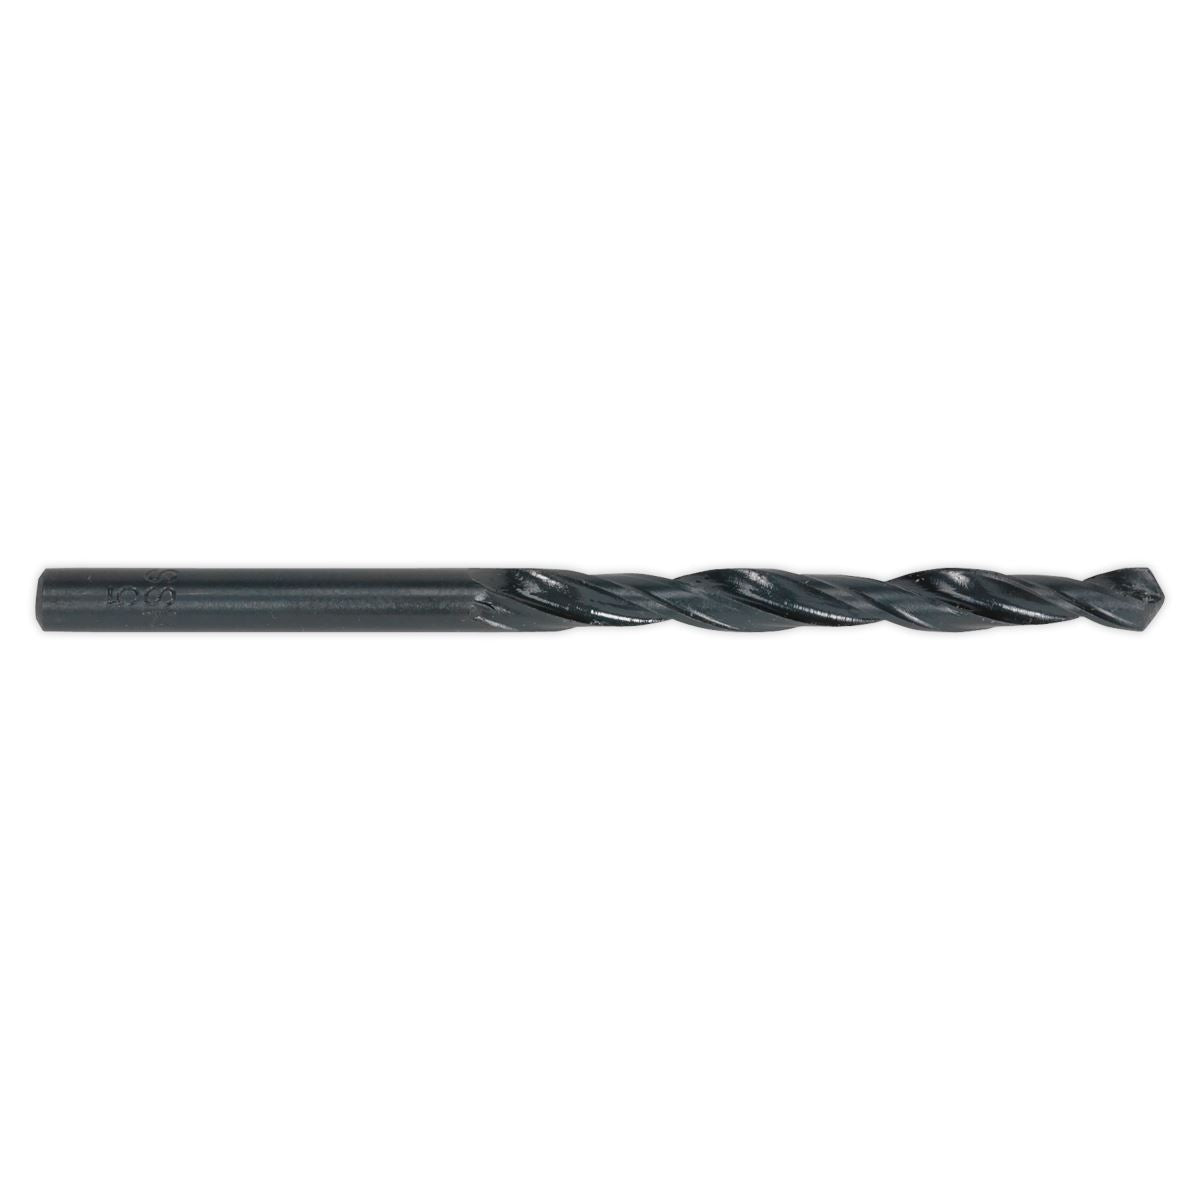 Sealey HSS Roll Forged Drill Bit Ø2mm Pack of 10